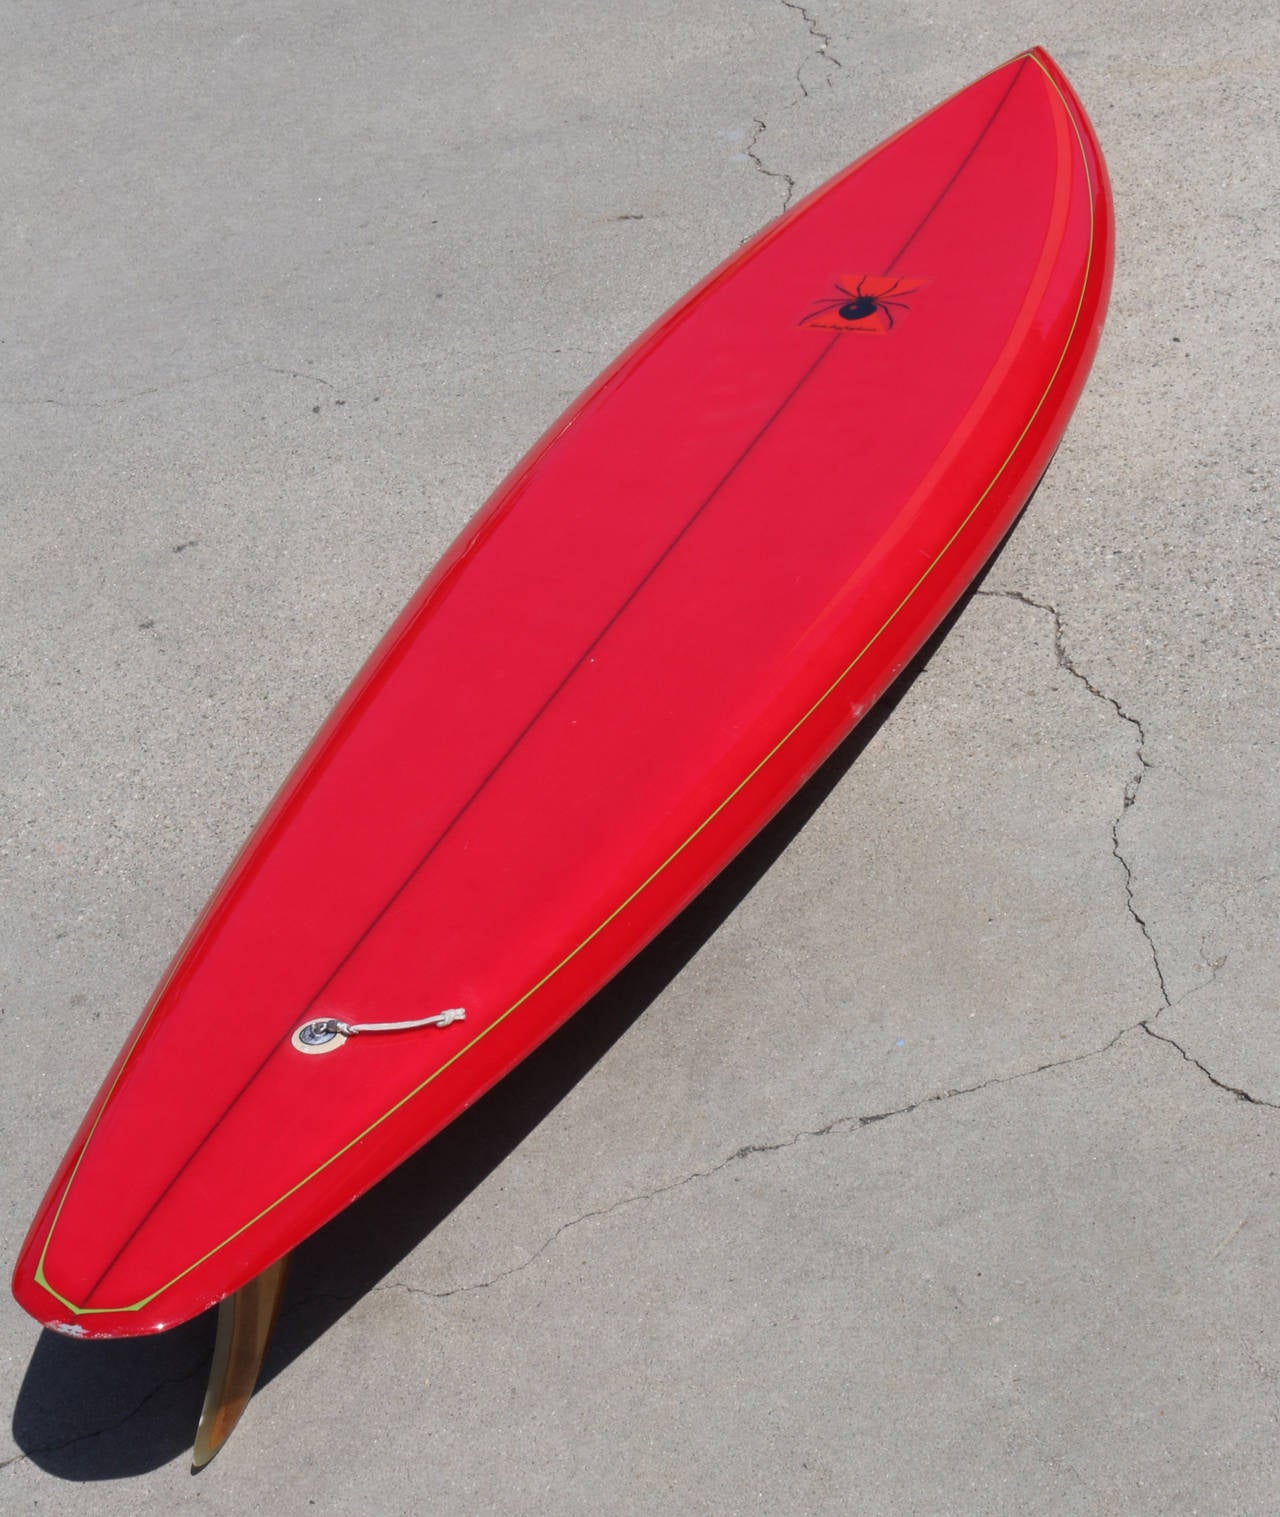 Color and verve is rolled into one in this vintage board by Santa Cruz Surfboards. The shape, the form, the color and the energy make this a great example of an early 1970s board.

Cherry red, lime green pin striping, black spider logo and a shape